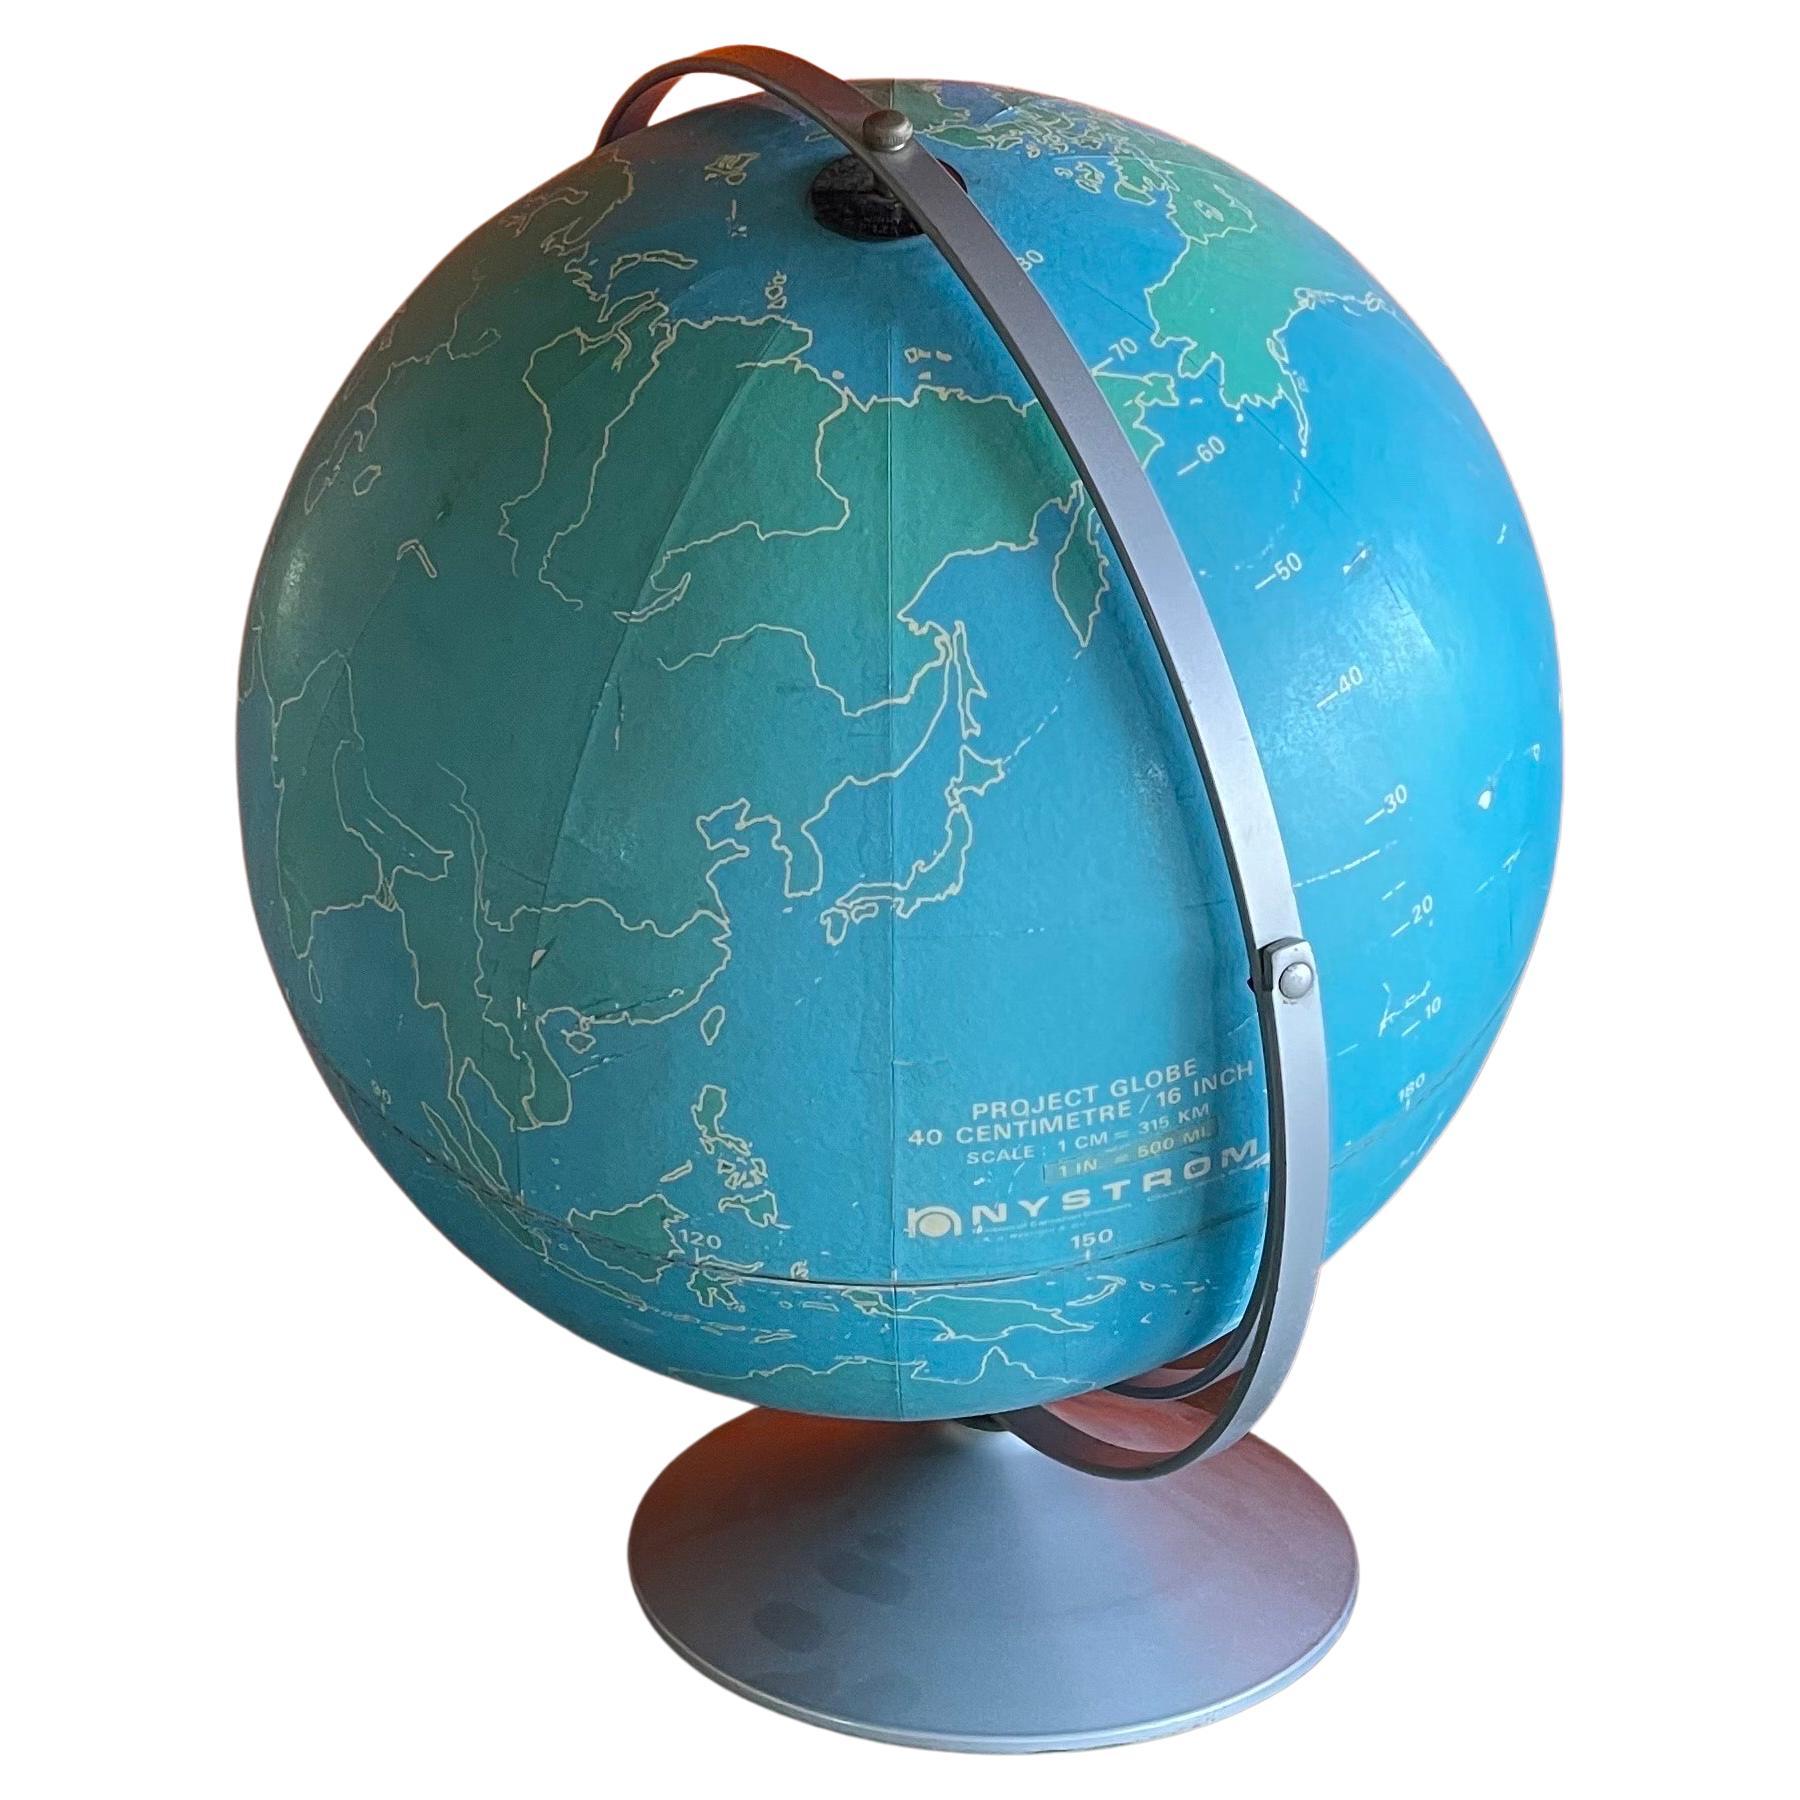 Vintage strategy chalk teaching globe on aluminum stand by A.J. Nystrom Co., circa 1960s. The globe is in good original condition and measures 17